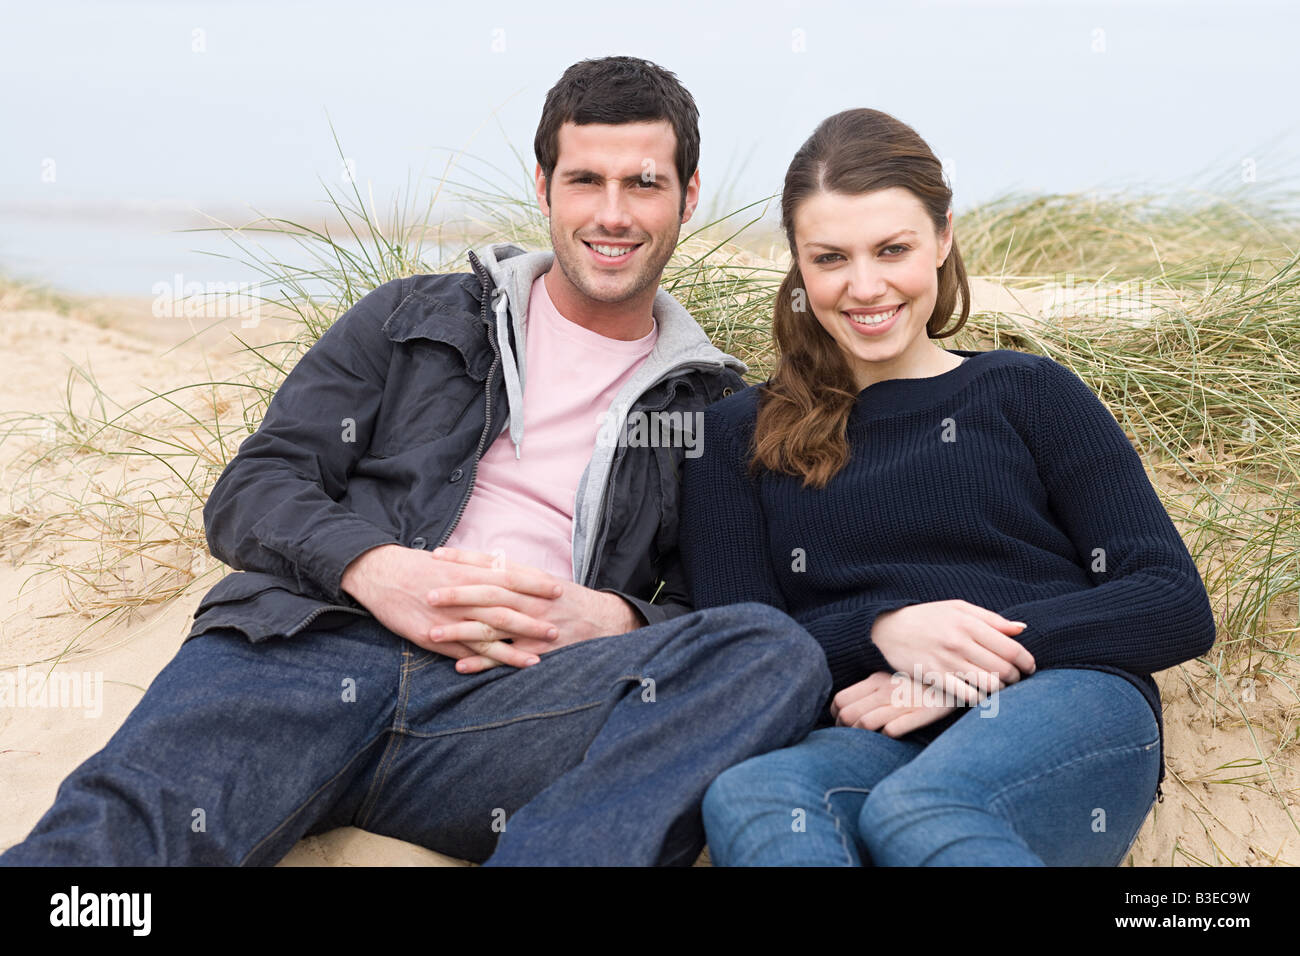 Couple sitting on a sand hill at beach Stock Photo